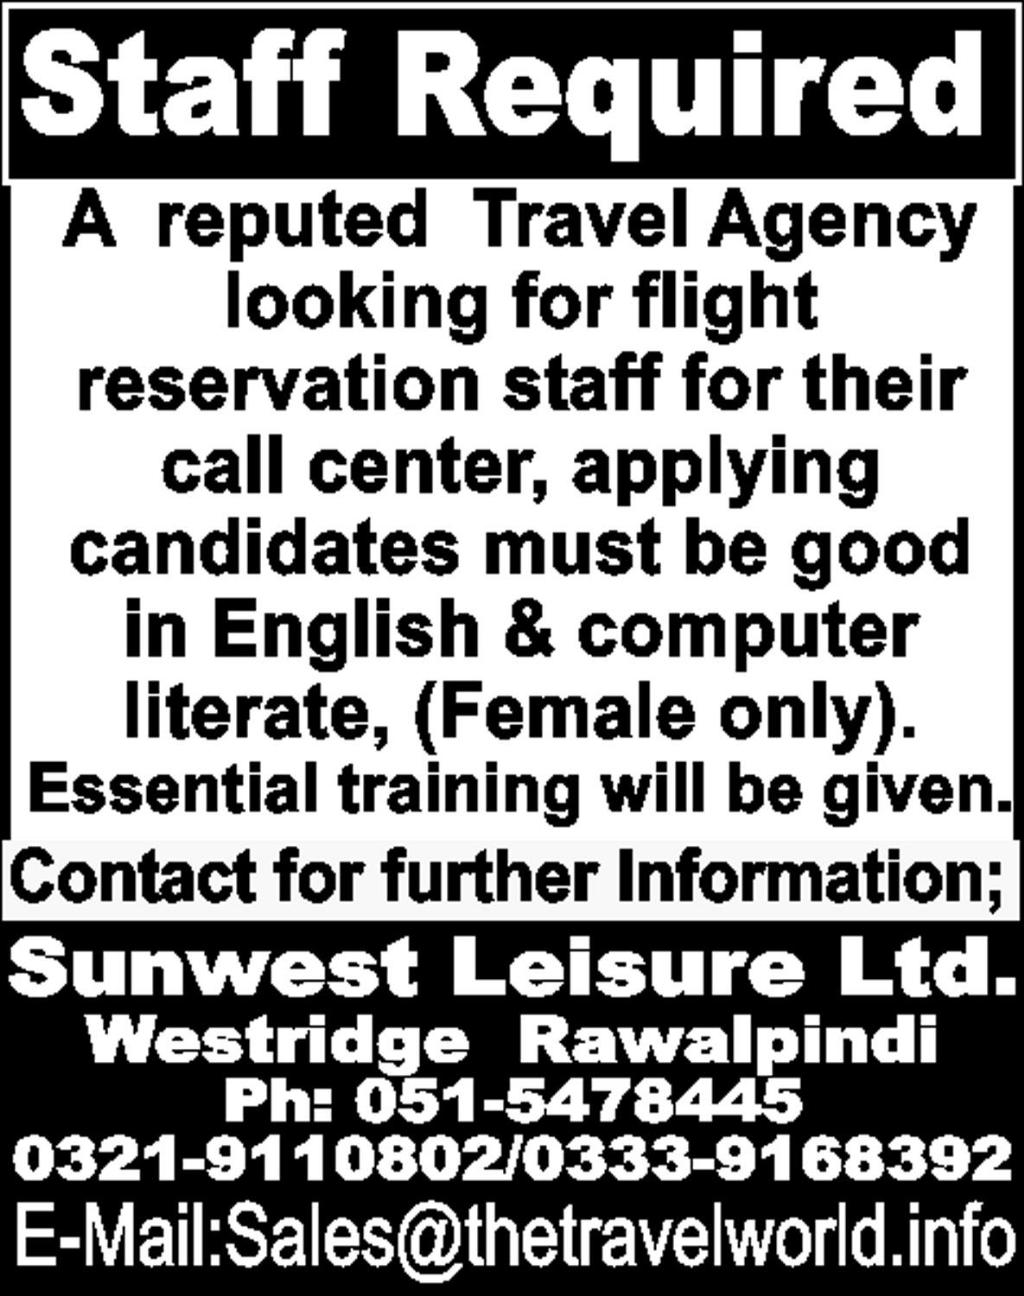 Travel Agency Requires Staff